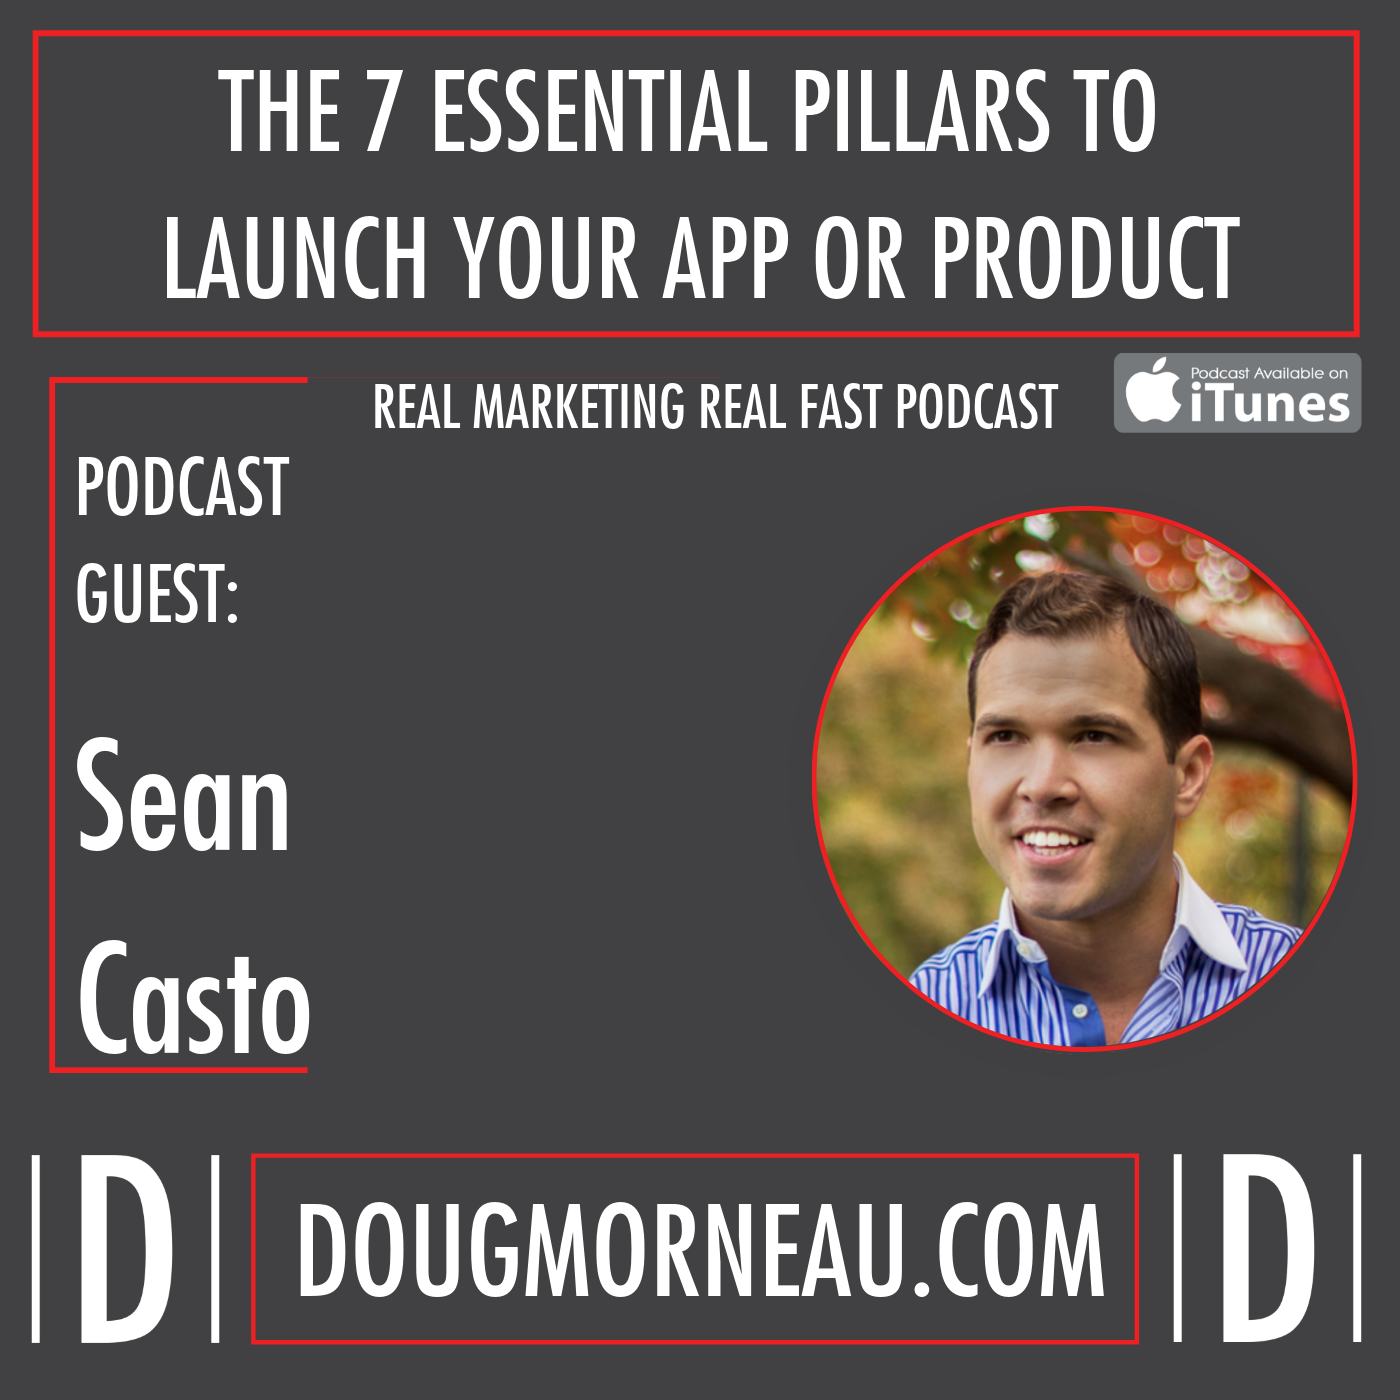 7 ESSENTIAL PILLARS TO LAUNCH YOUR APP OR PRODUCT - SEAN CASTO - DOUG MORNEAU - REAL MARKETING REAL FAST PODCAST